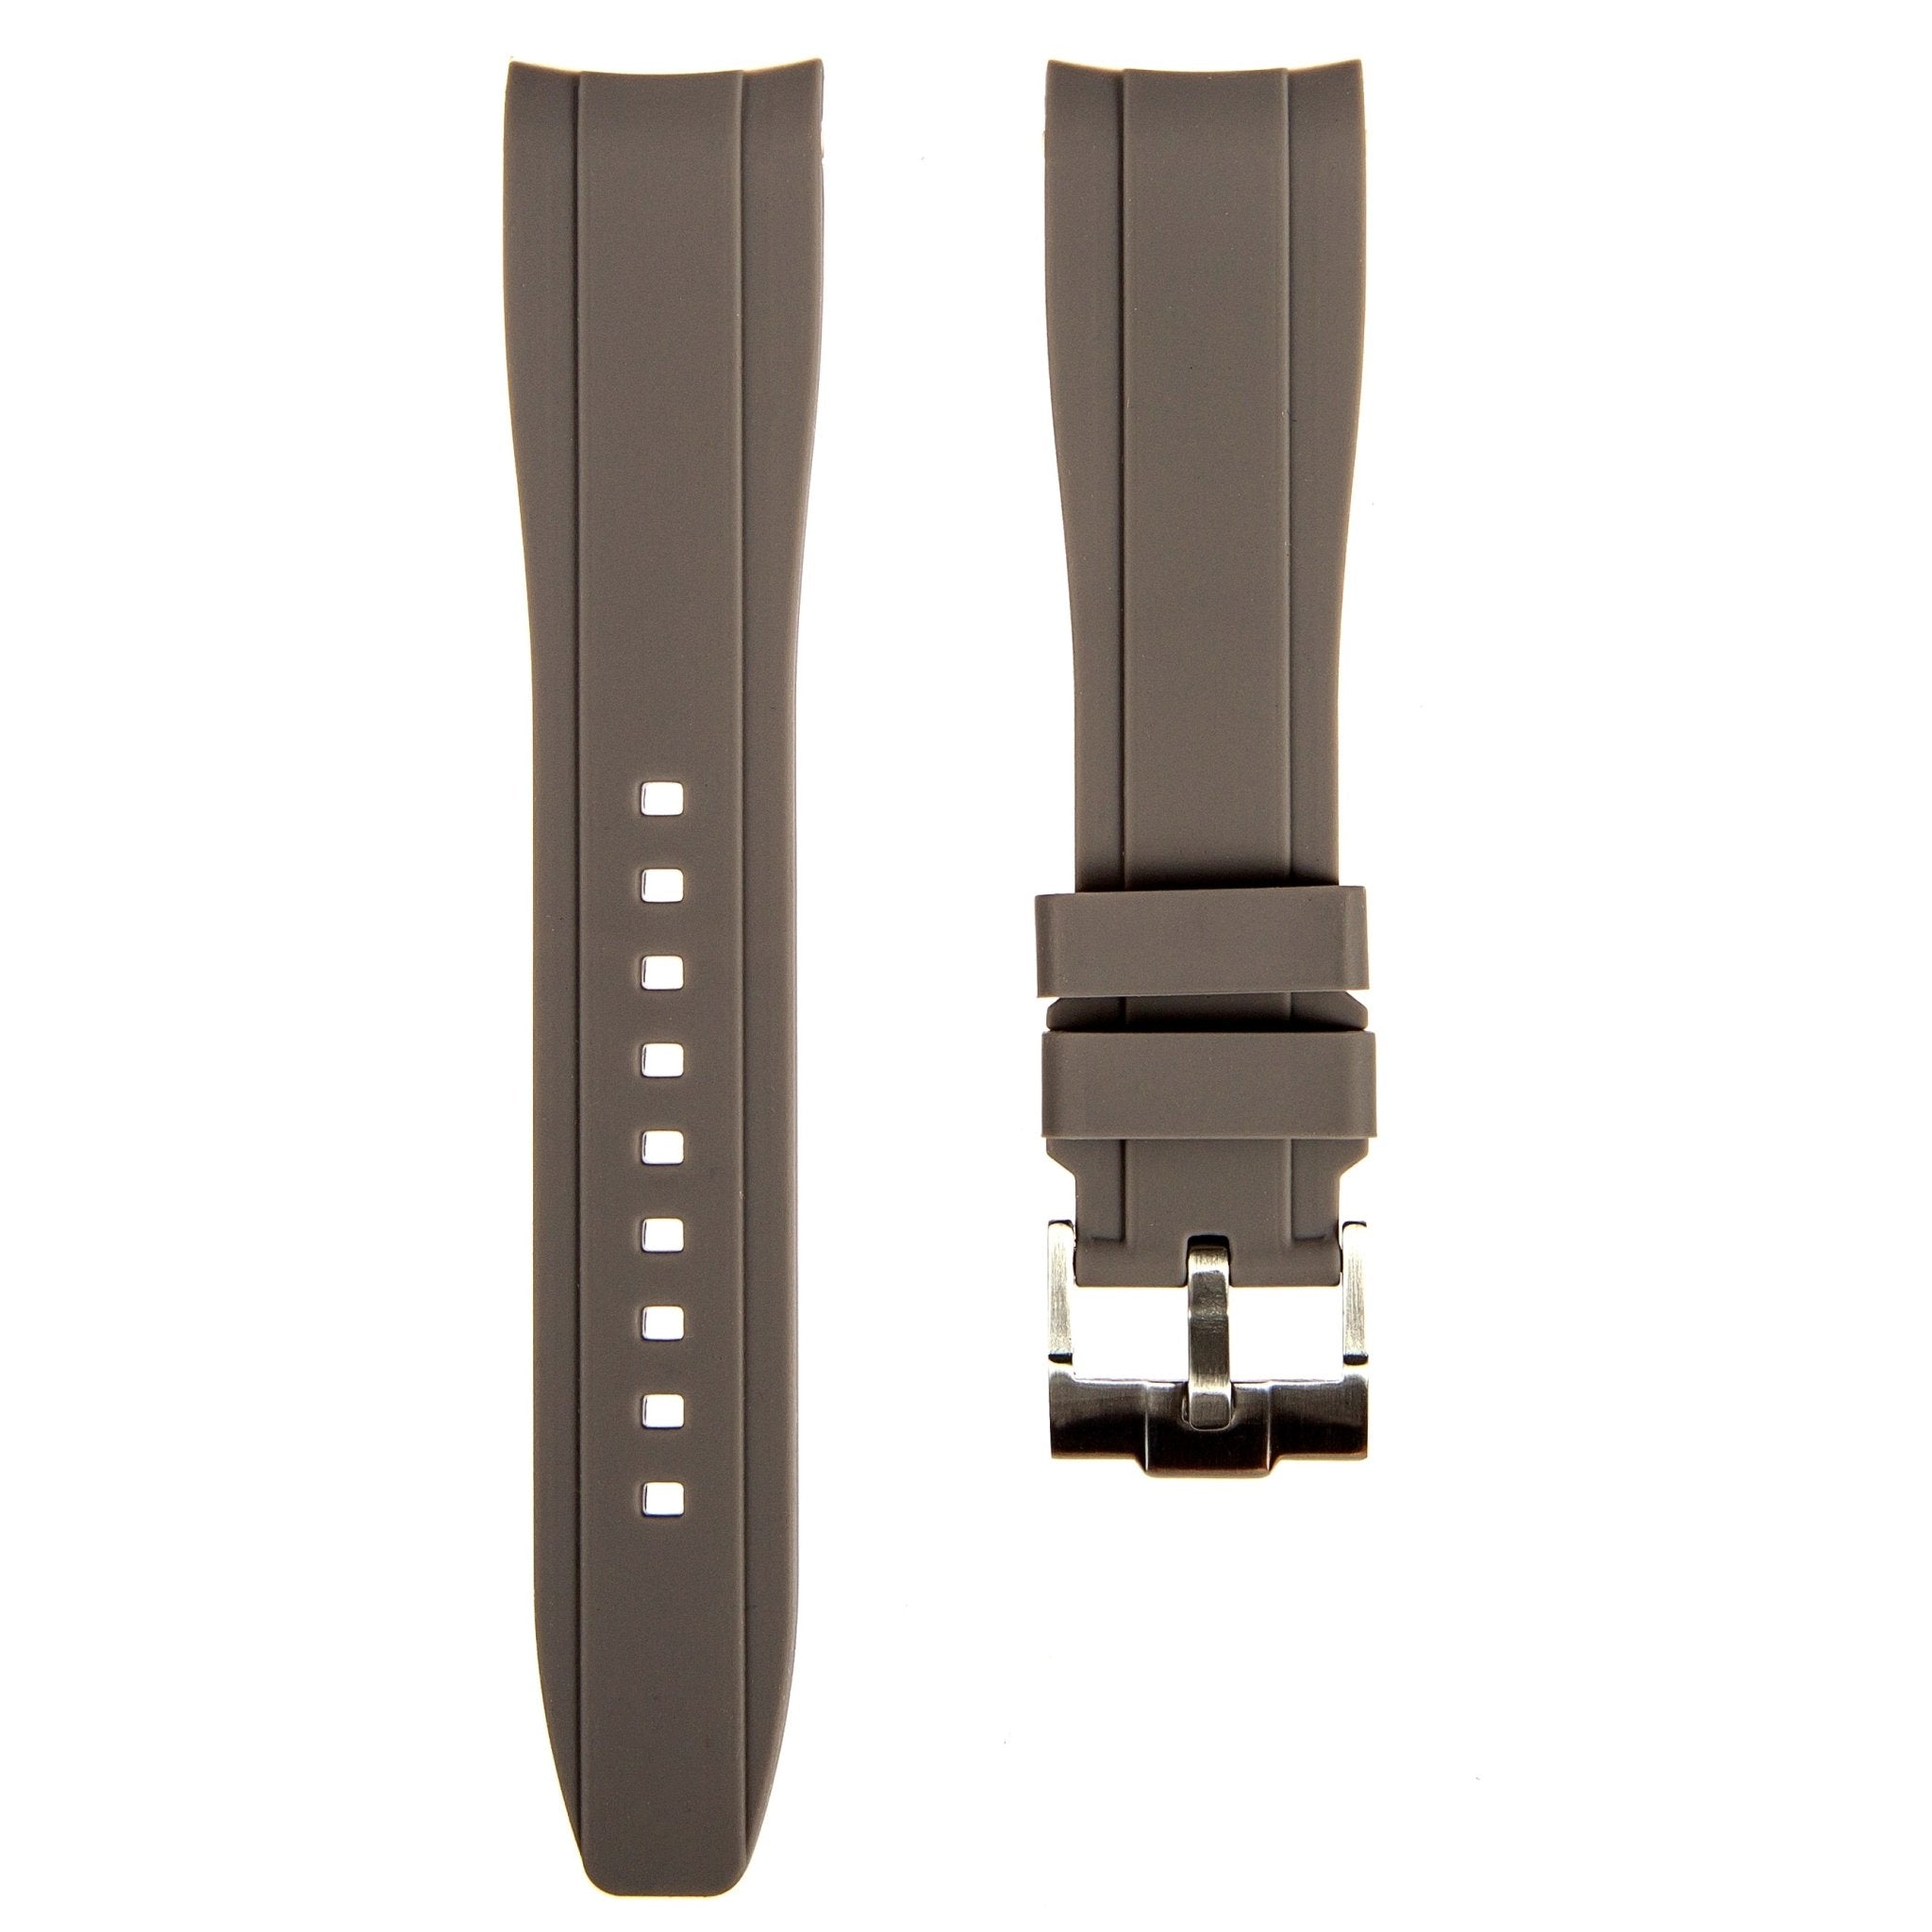 Curved End Soft Silicone Strap - Compatible with Blancpain x Swatch – Grey (2418) -StrapSeeker